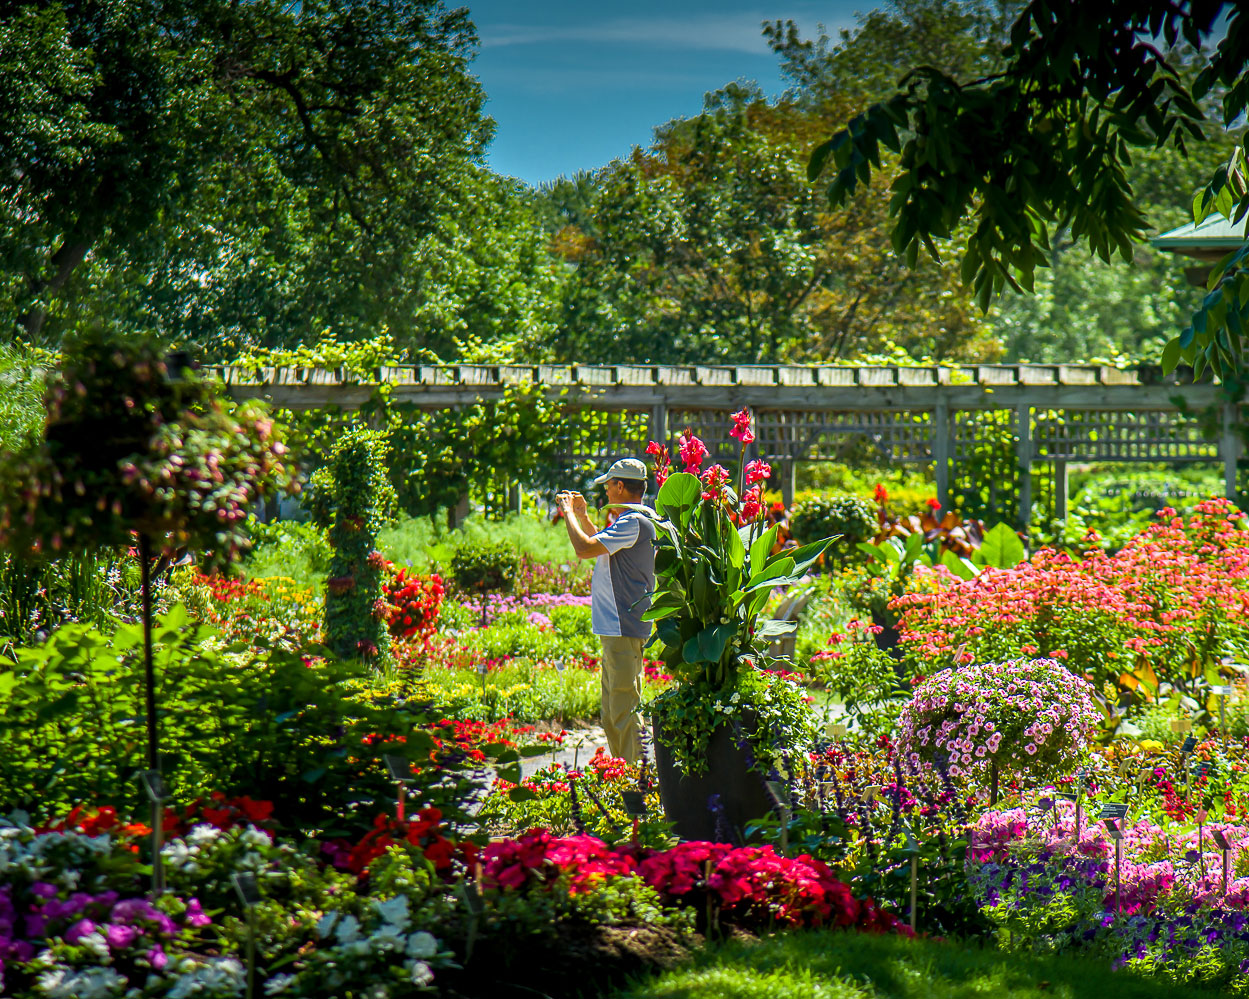 Montreal Travel Guide: man taking photos in a blooming garden.